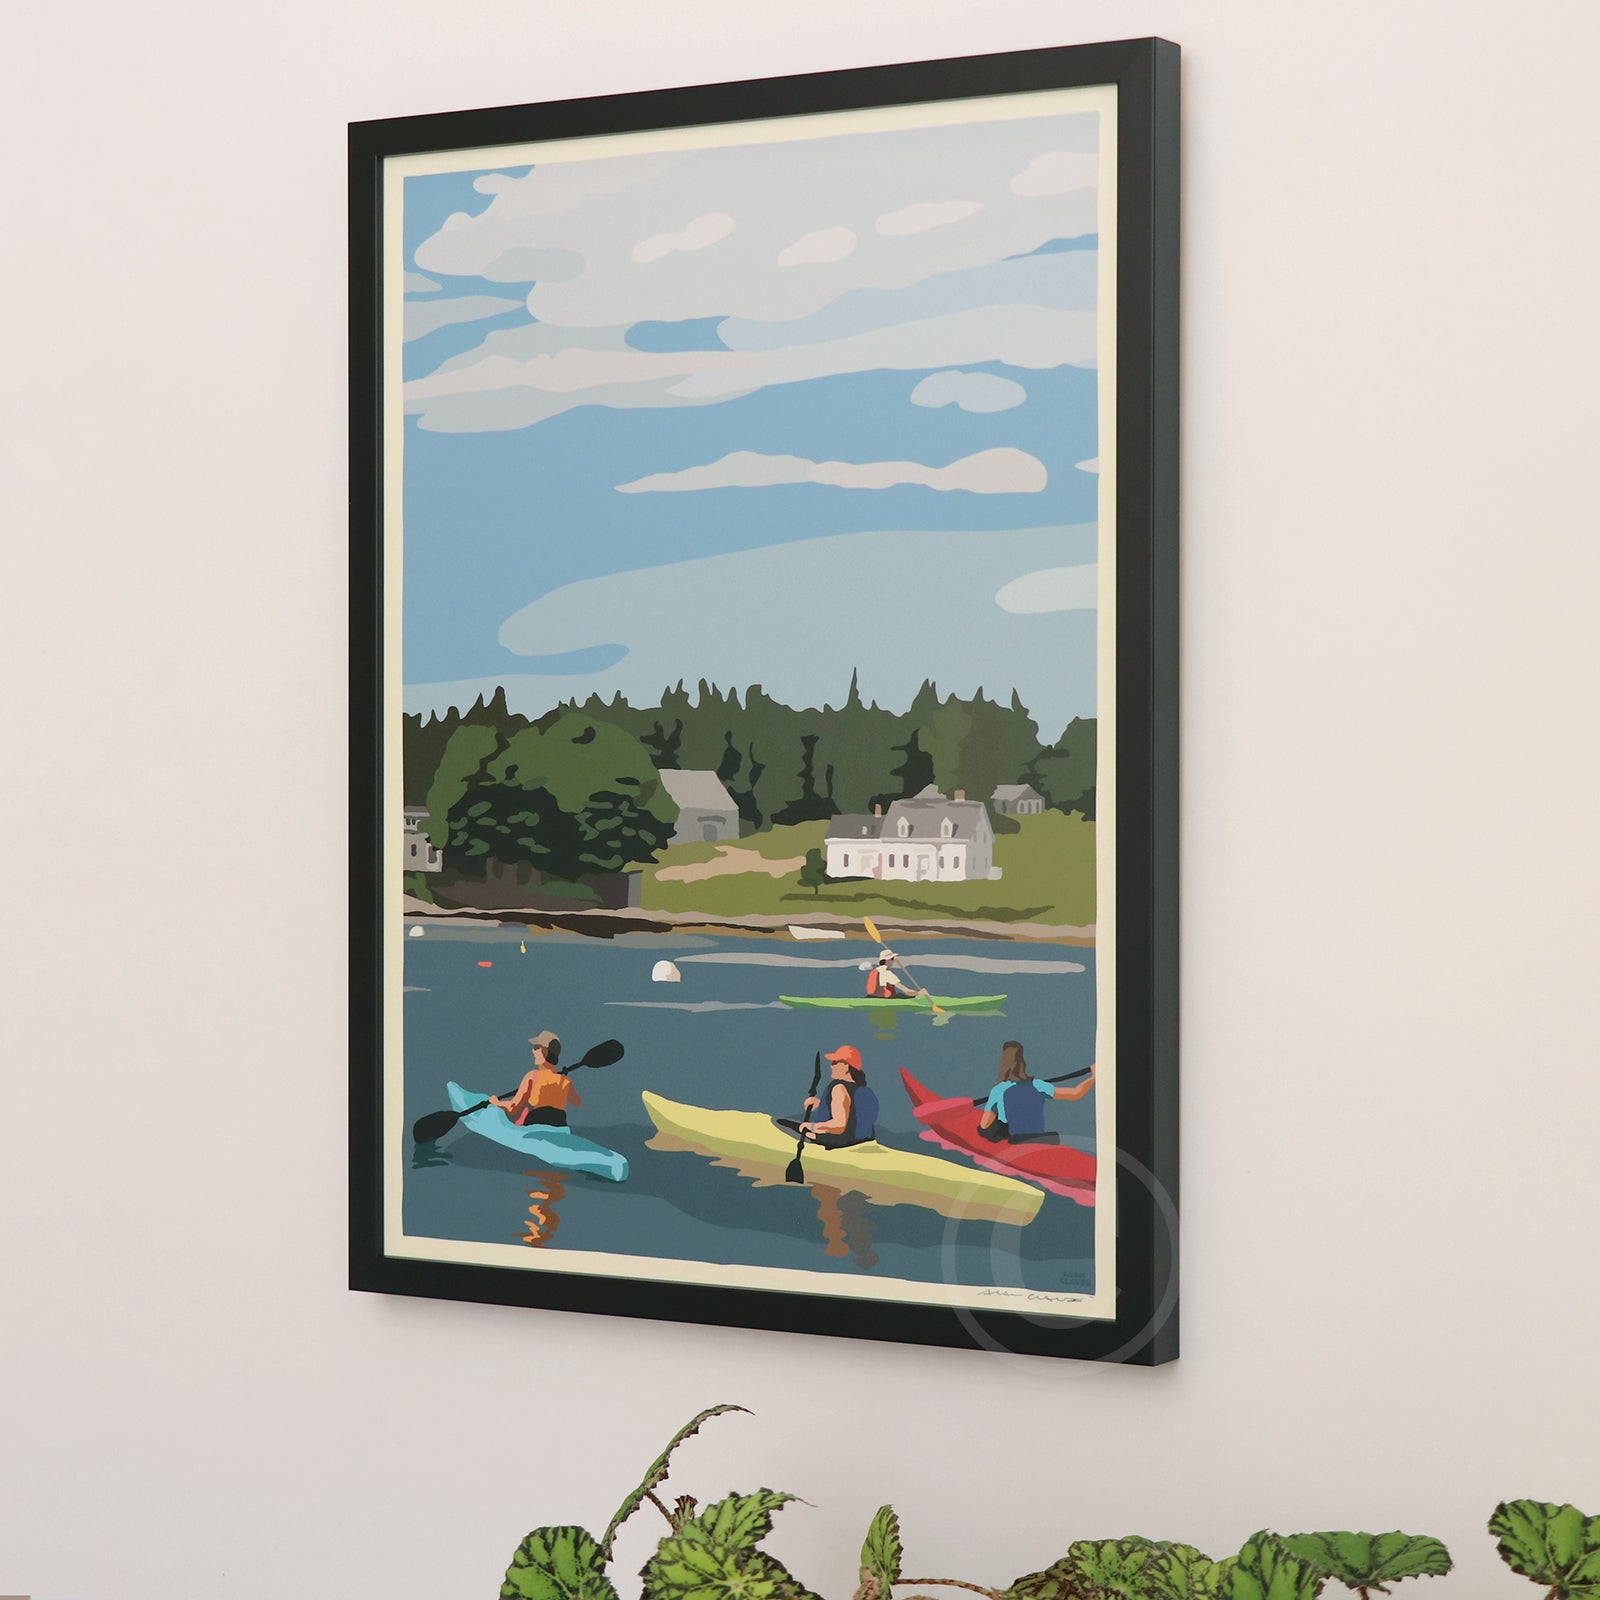 Kayaking in Port Clyde Art Print 18" x 24" Framed Wall Poster By Alan Claude - Maine